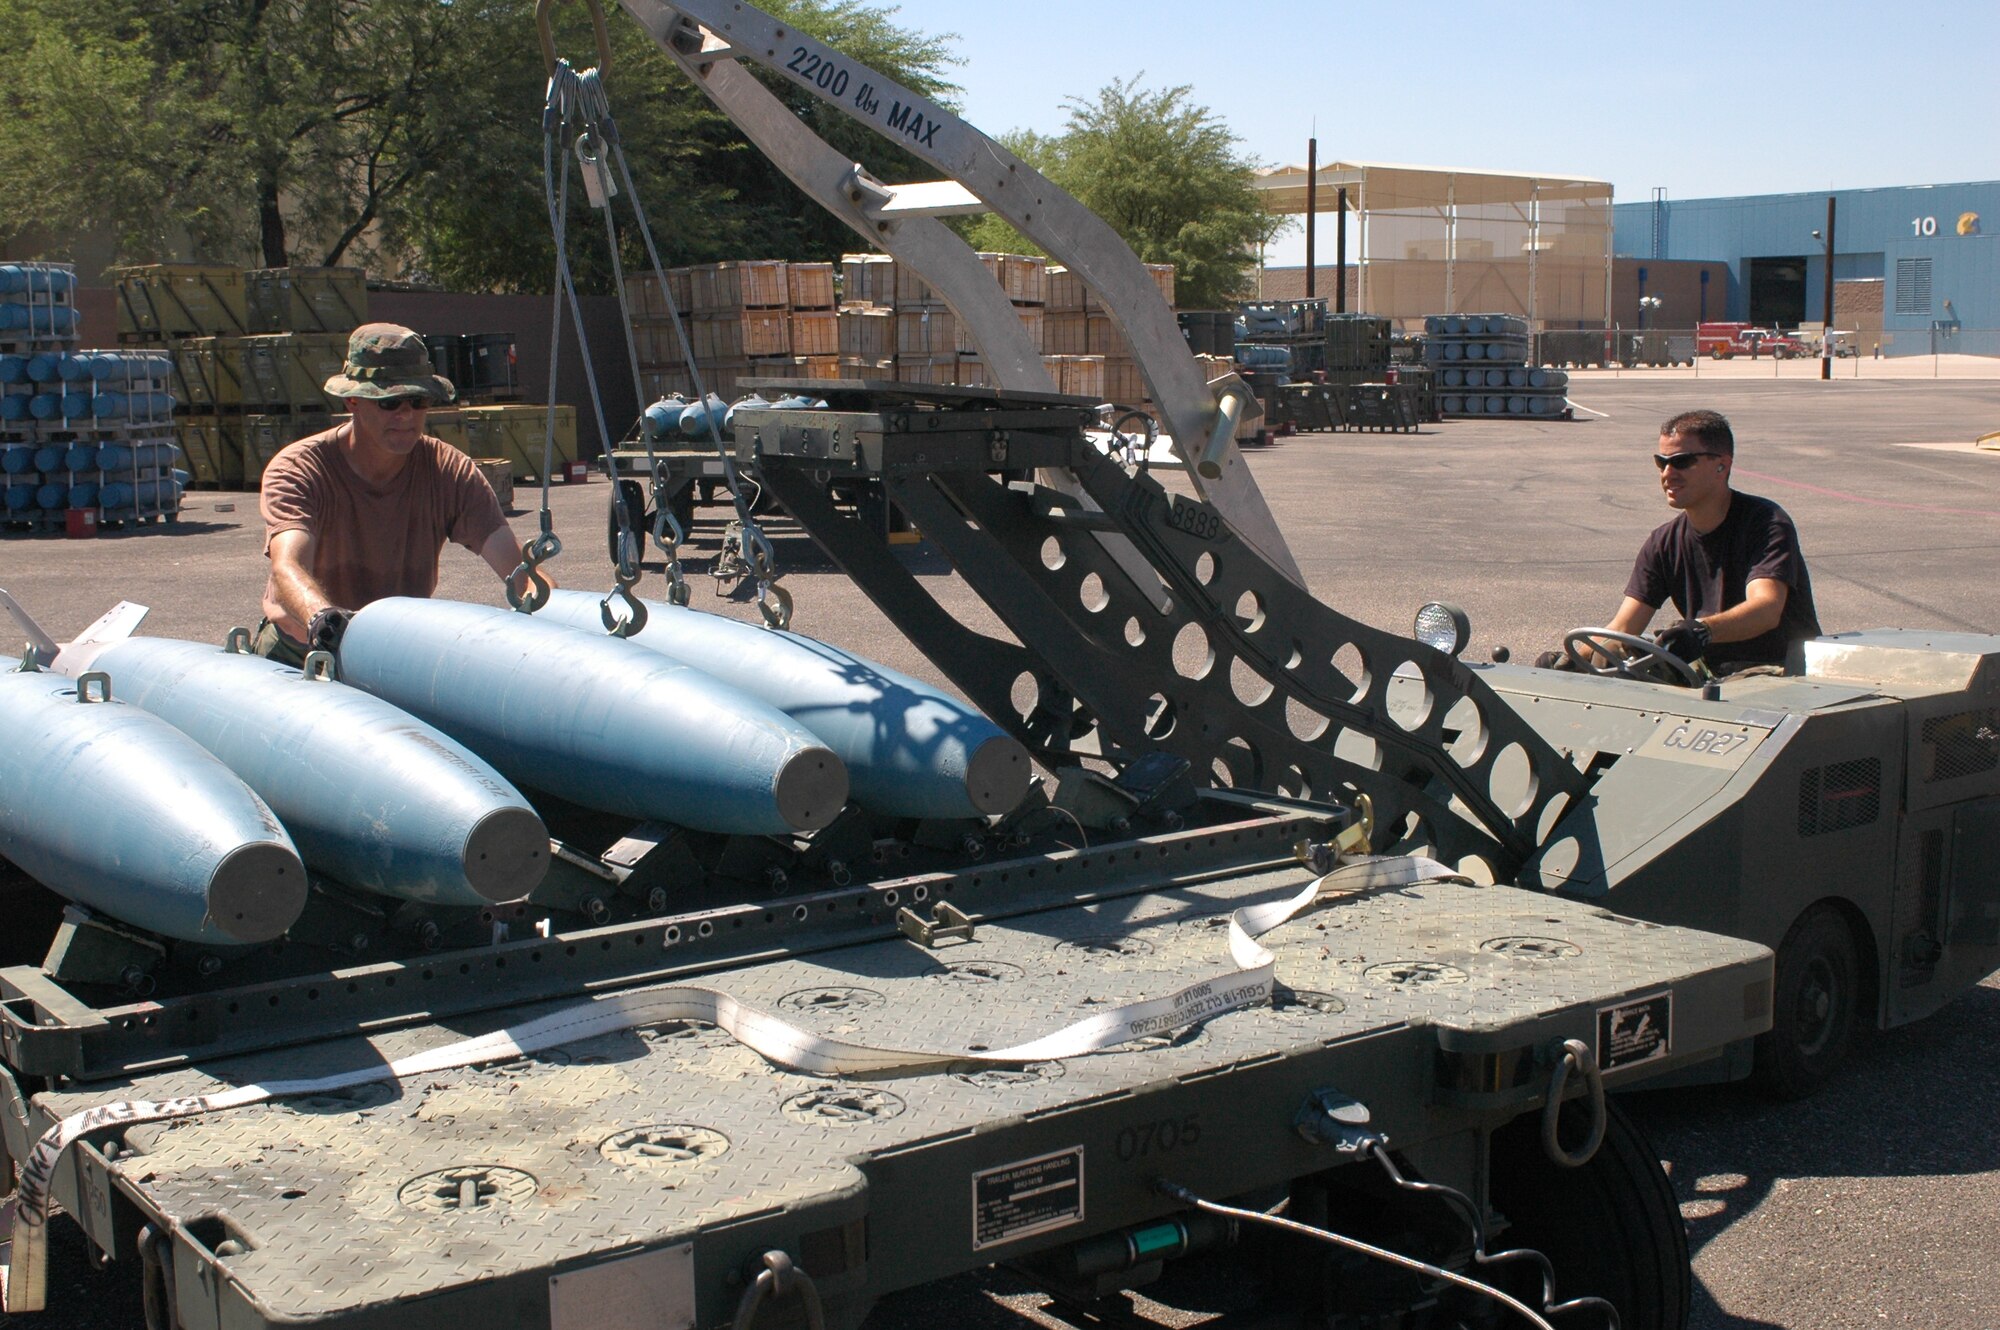 Staff Sgt. Scott Thompson, munitions technician, drives a MJ-1B bomb lift to load BDU-50 inert bombs to a trailer for assembly and transport to the flight line. Master Sgt. Jim Stenger, assistant munitions supervisor, guides the bombs during transport to the trailer. This bomb lift, and others like it, is maintained by the wing's aerospace ground equipment shop. (Air National Guard photo by Staff Sgt. Jordan Jones)